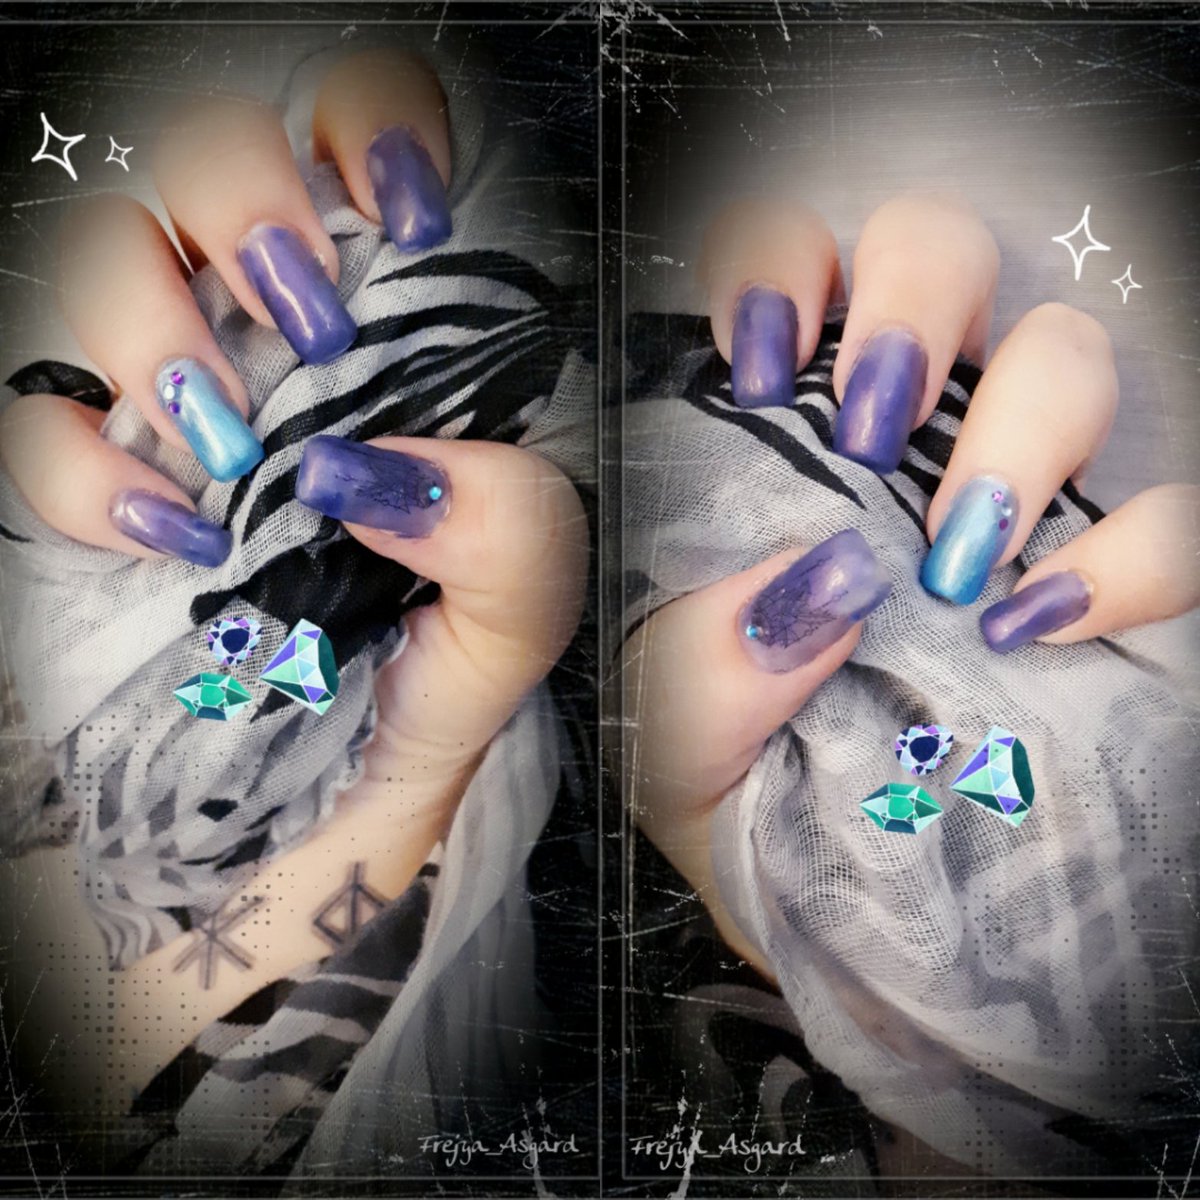 Just finished another naildesign 💜💙 Dreamcatcher and Watercolor look with rhinestones 💅 🌌🕉

#gelnails #watercolordesign #watercolor #nails #naildesign #blueandlilac #blueandpurple #dreamcatcher #rhinestones